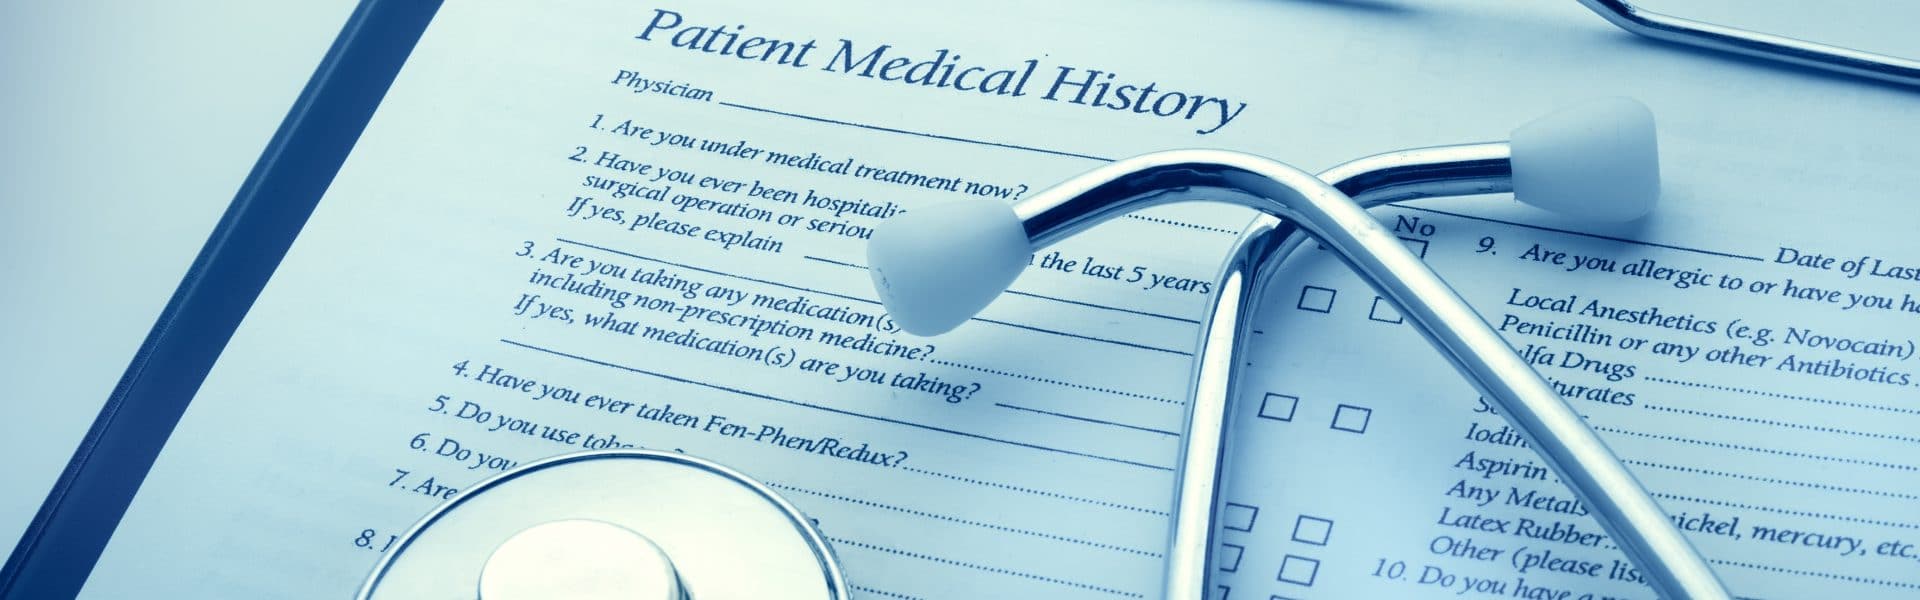 Patient Medical History